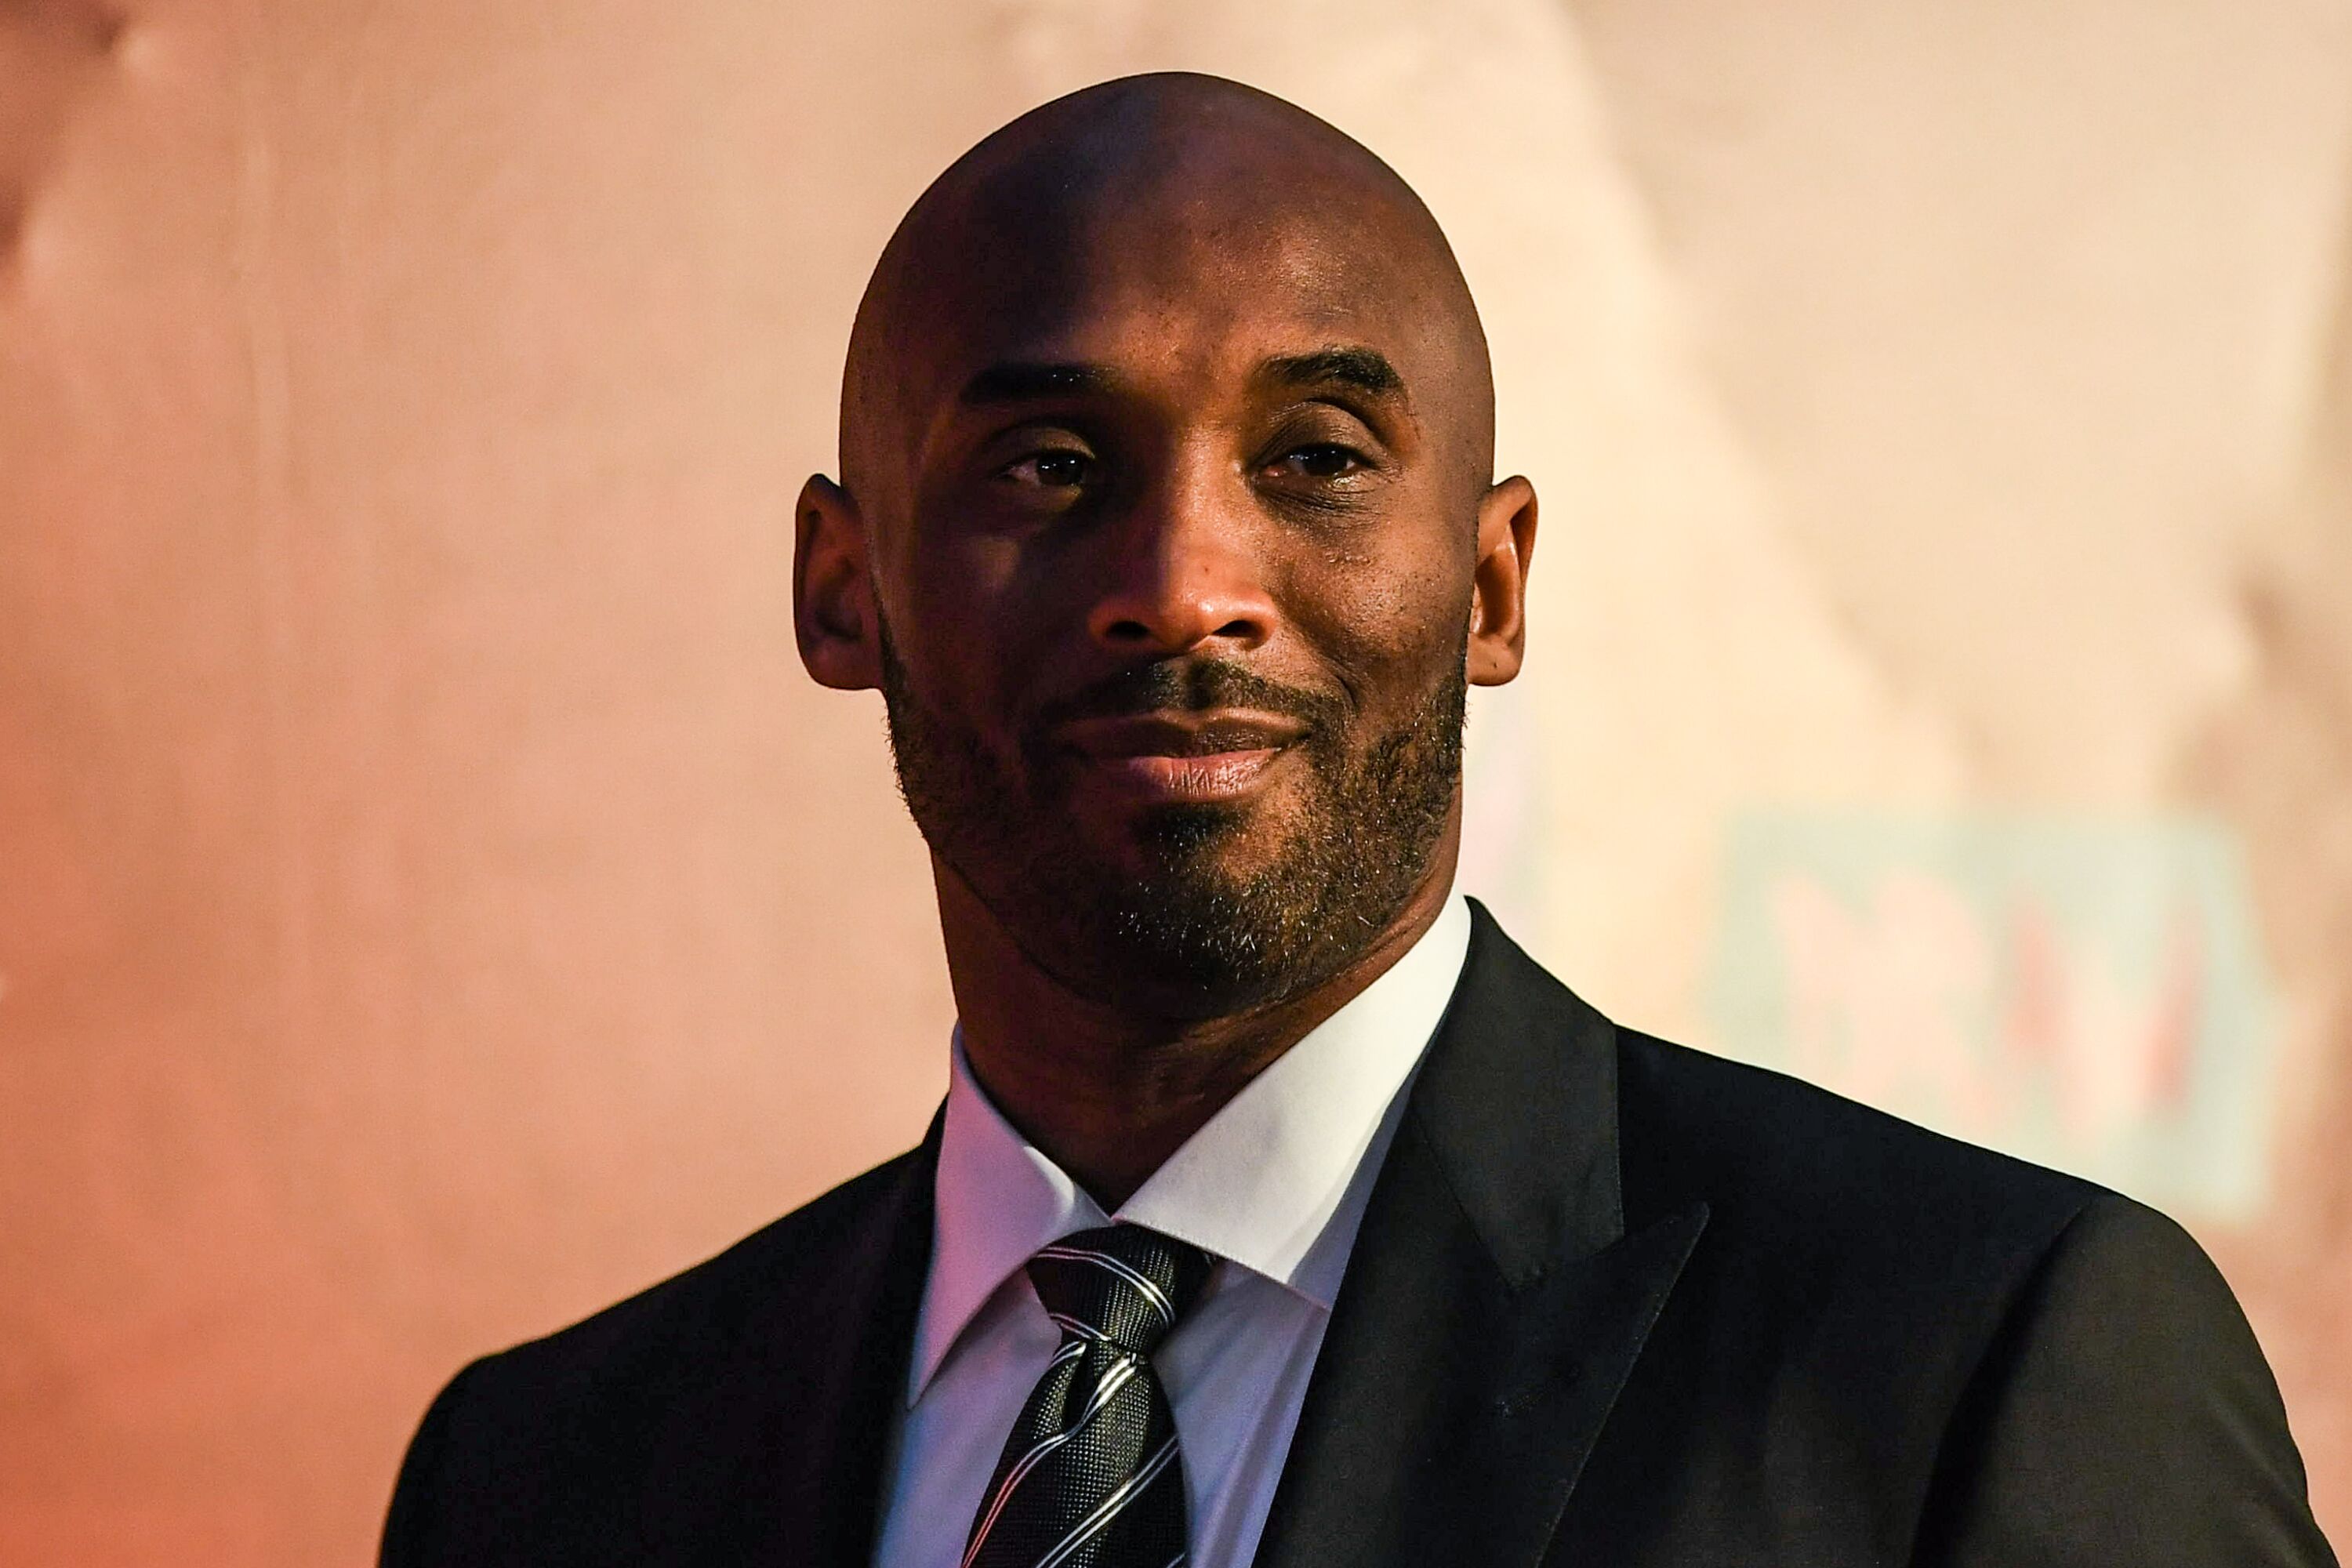 Late Kobe Bryant during the FIBA Basketball World Cup 2019 Draw Ceremony on March 16, 2019. | Photo: Getty Images